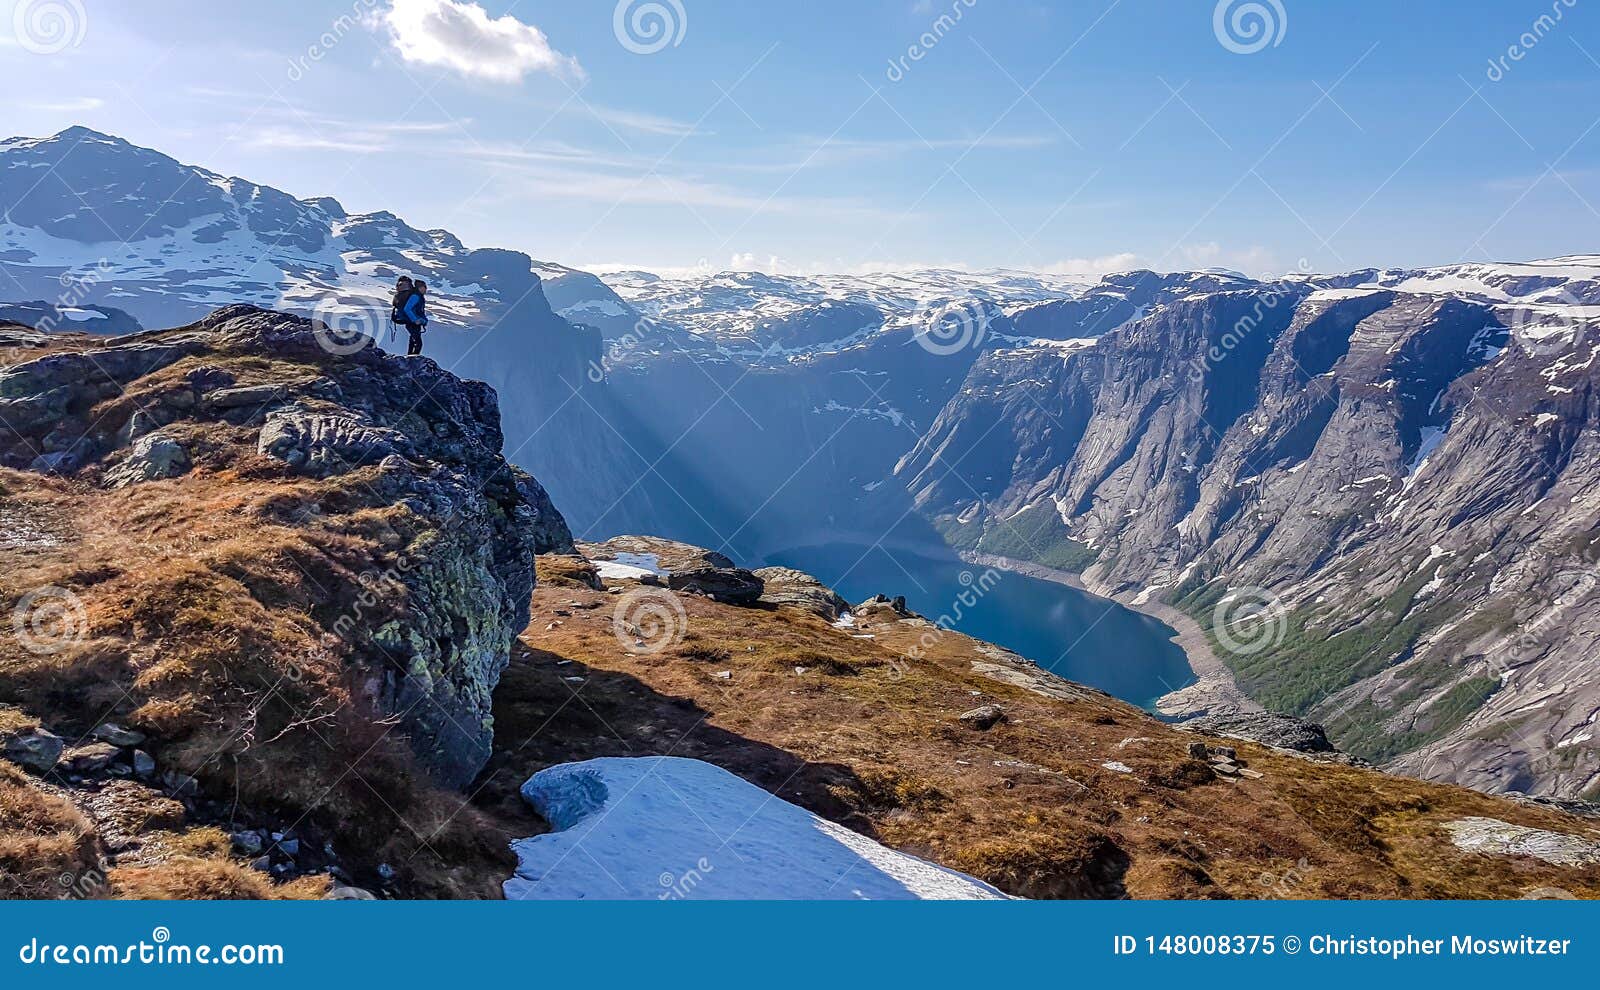 Norway A Man Standing On A Tall Rock With The Lake In The Back Stock Image Image Of Outdoors Hike